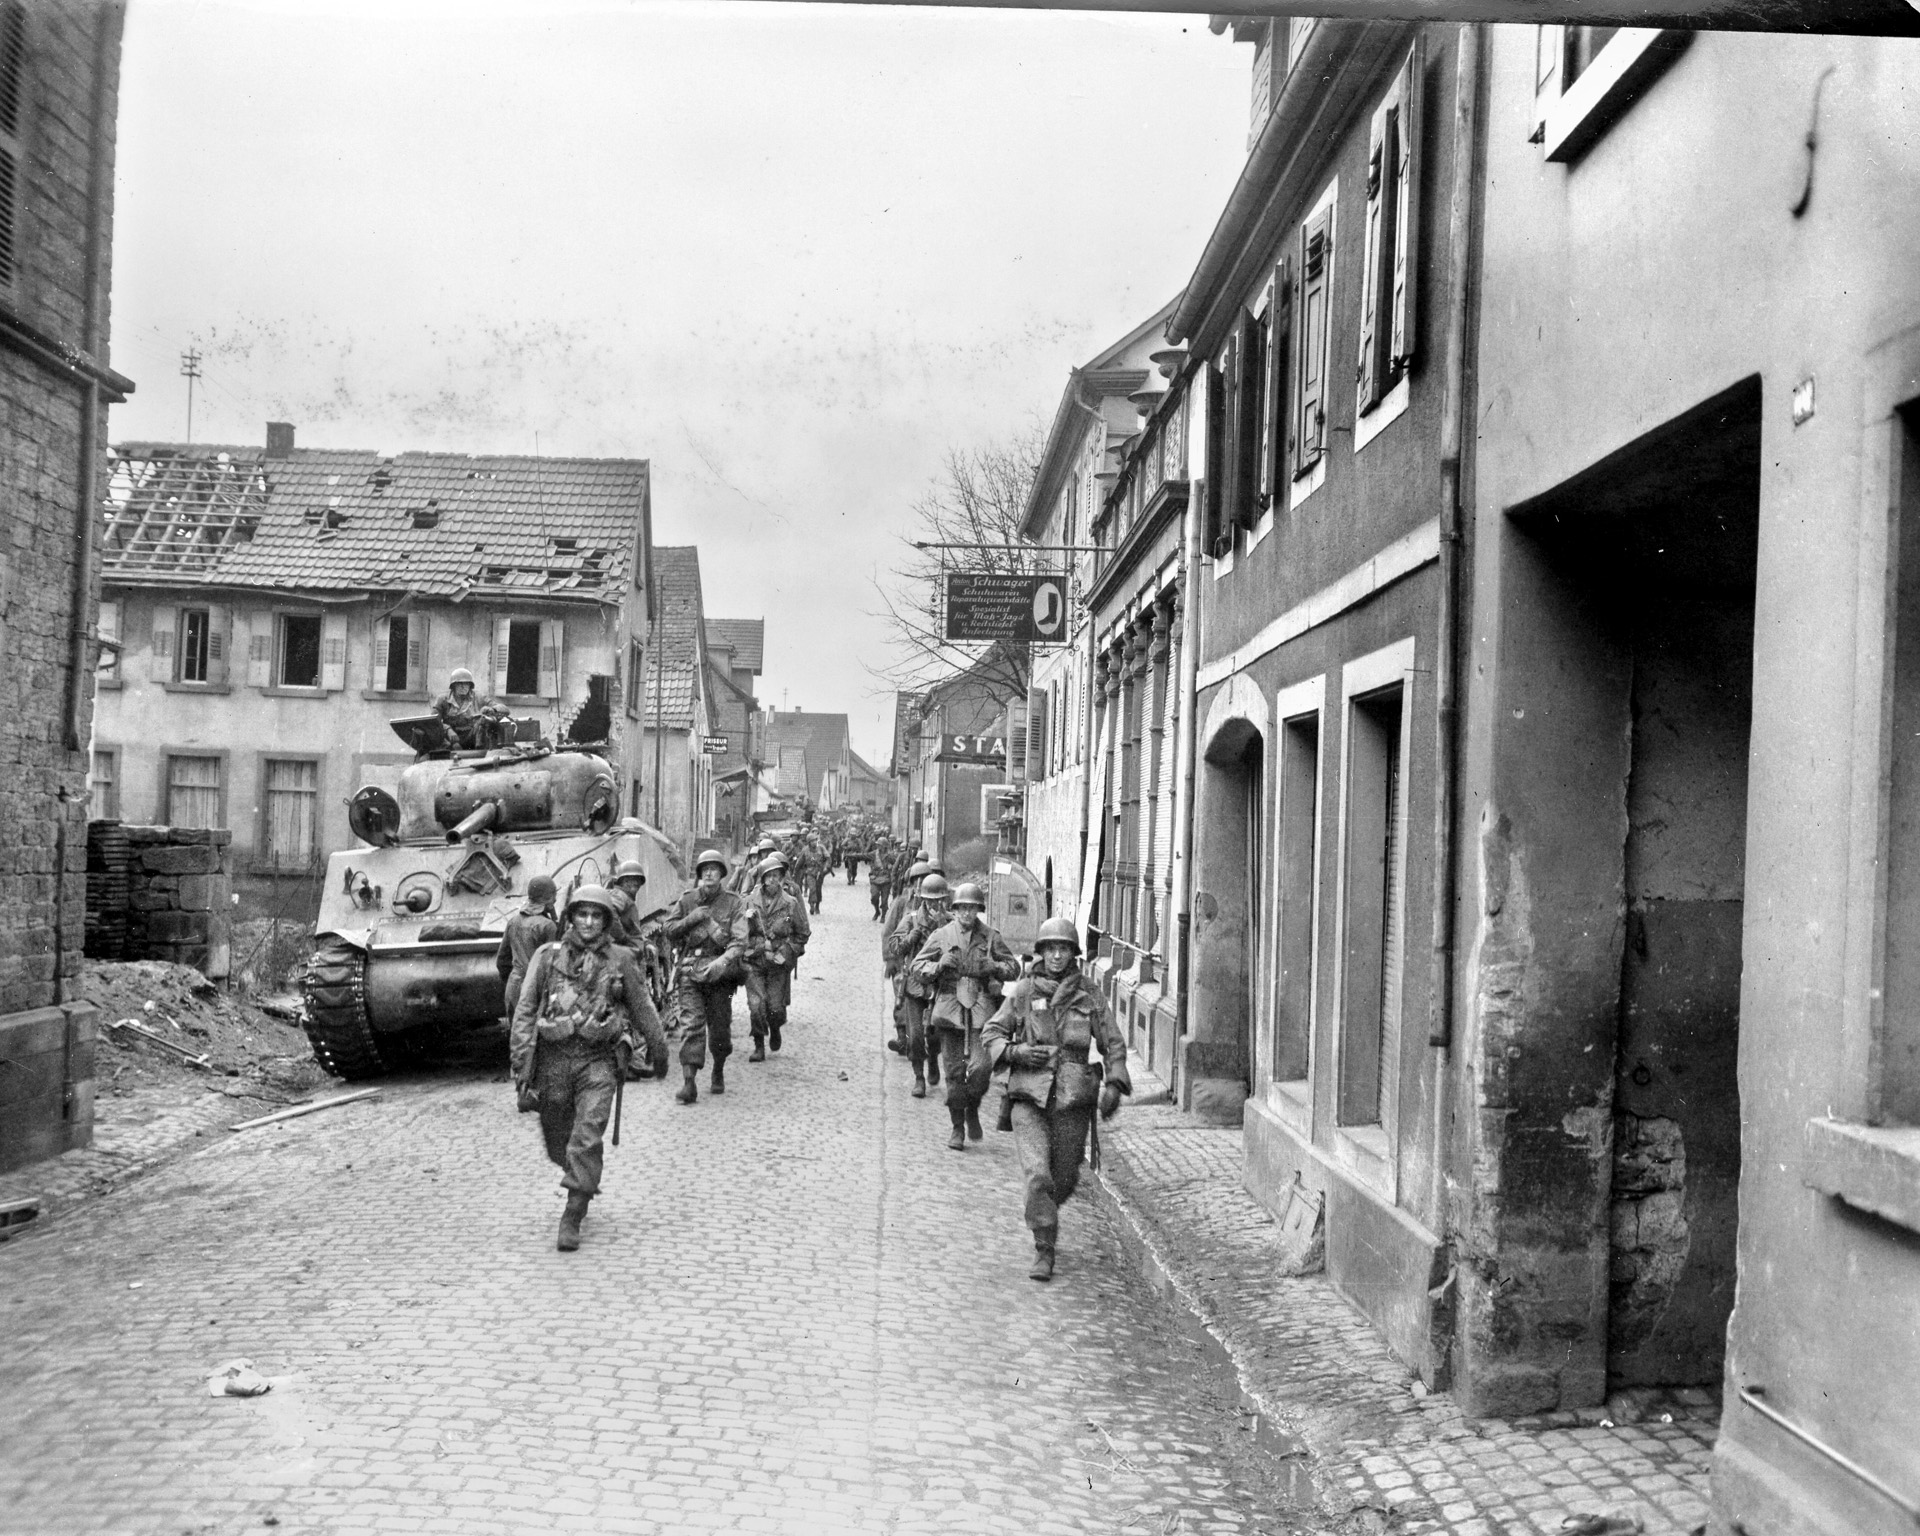 Tanks and men of the 10th Armored Division make their way through the city of Kaiserslautern in the Palatinate region of southwest Germany.